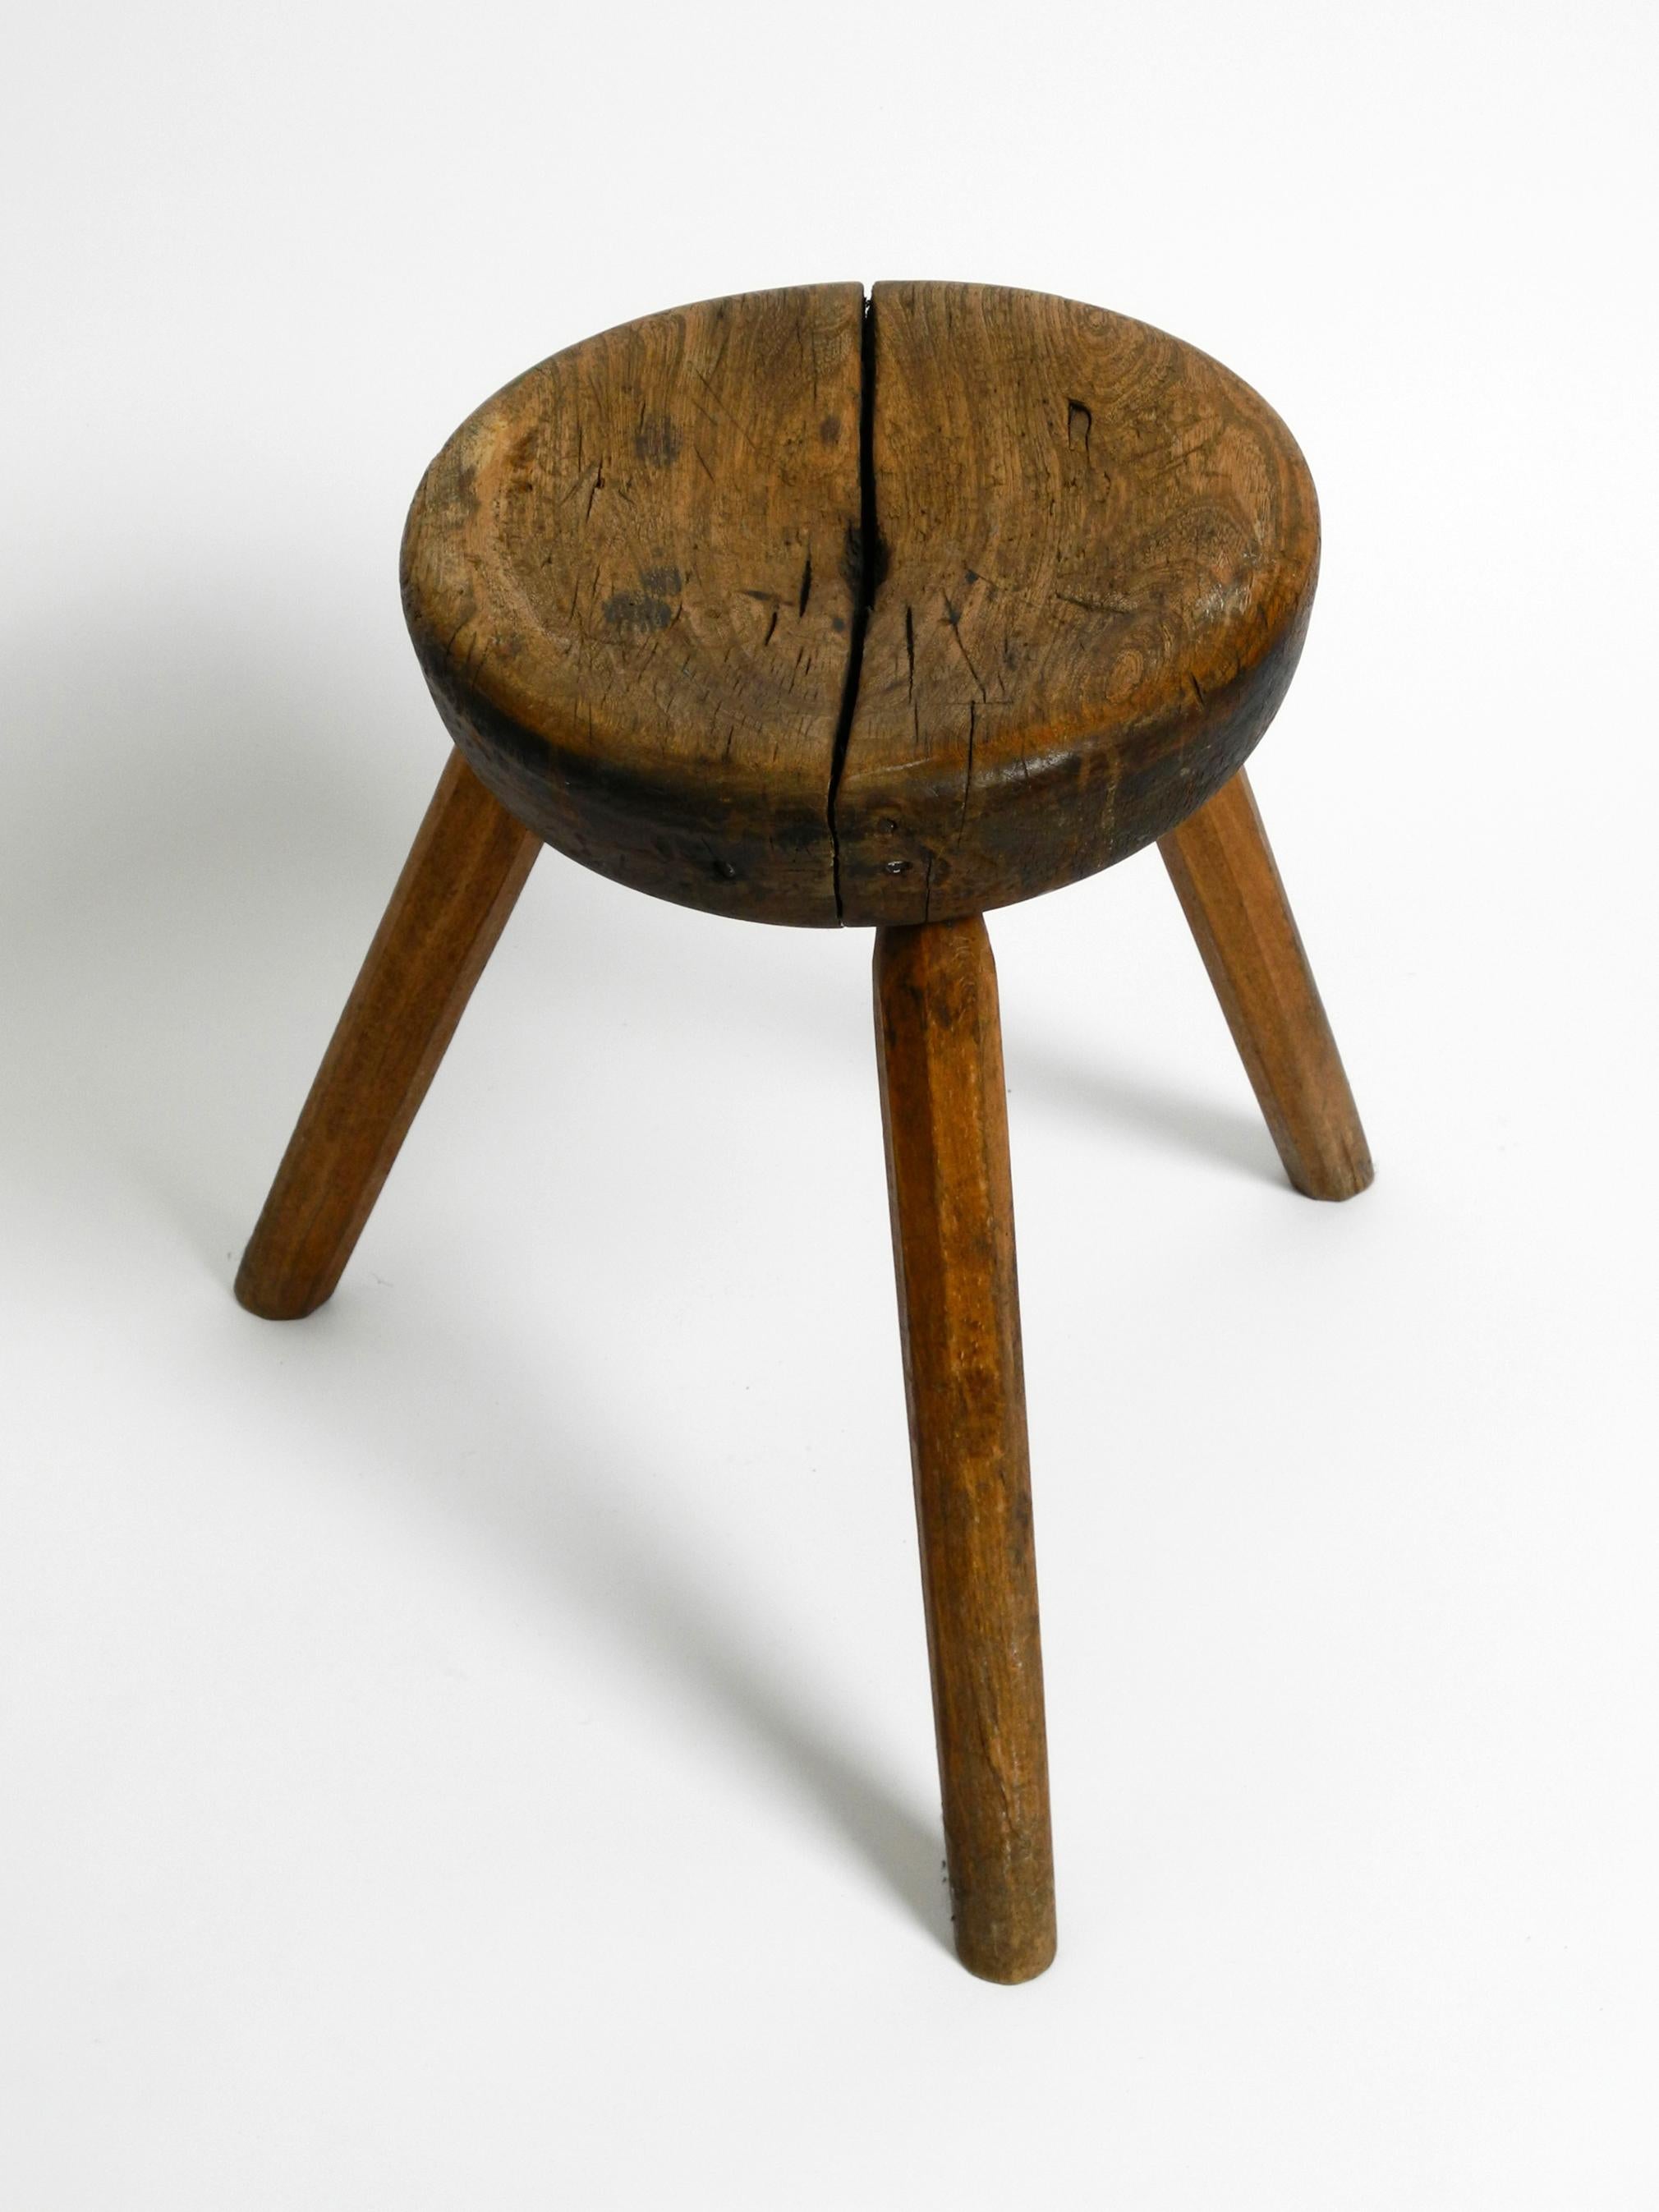 Mid-20th Century Beautiful French Original Mid Century Solid Wood Stool with a Dreamlike Patina